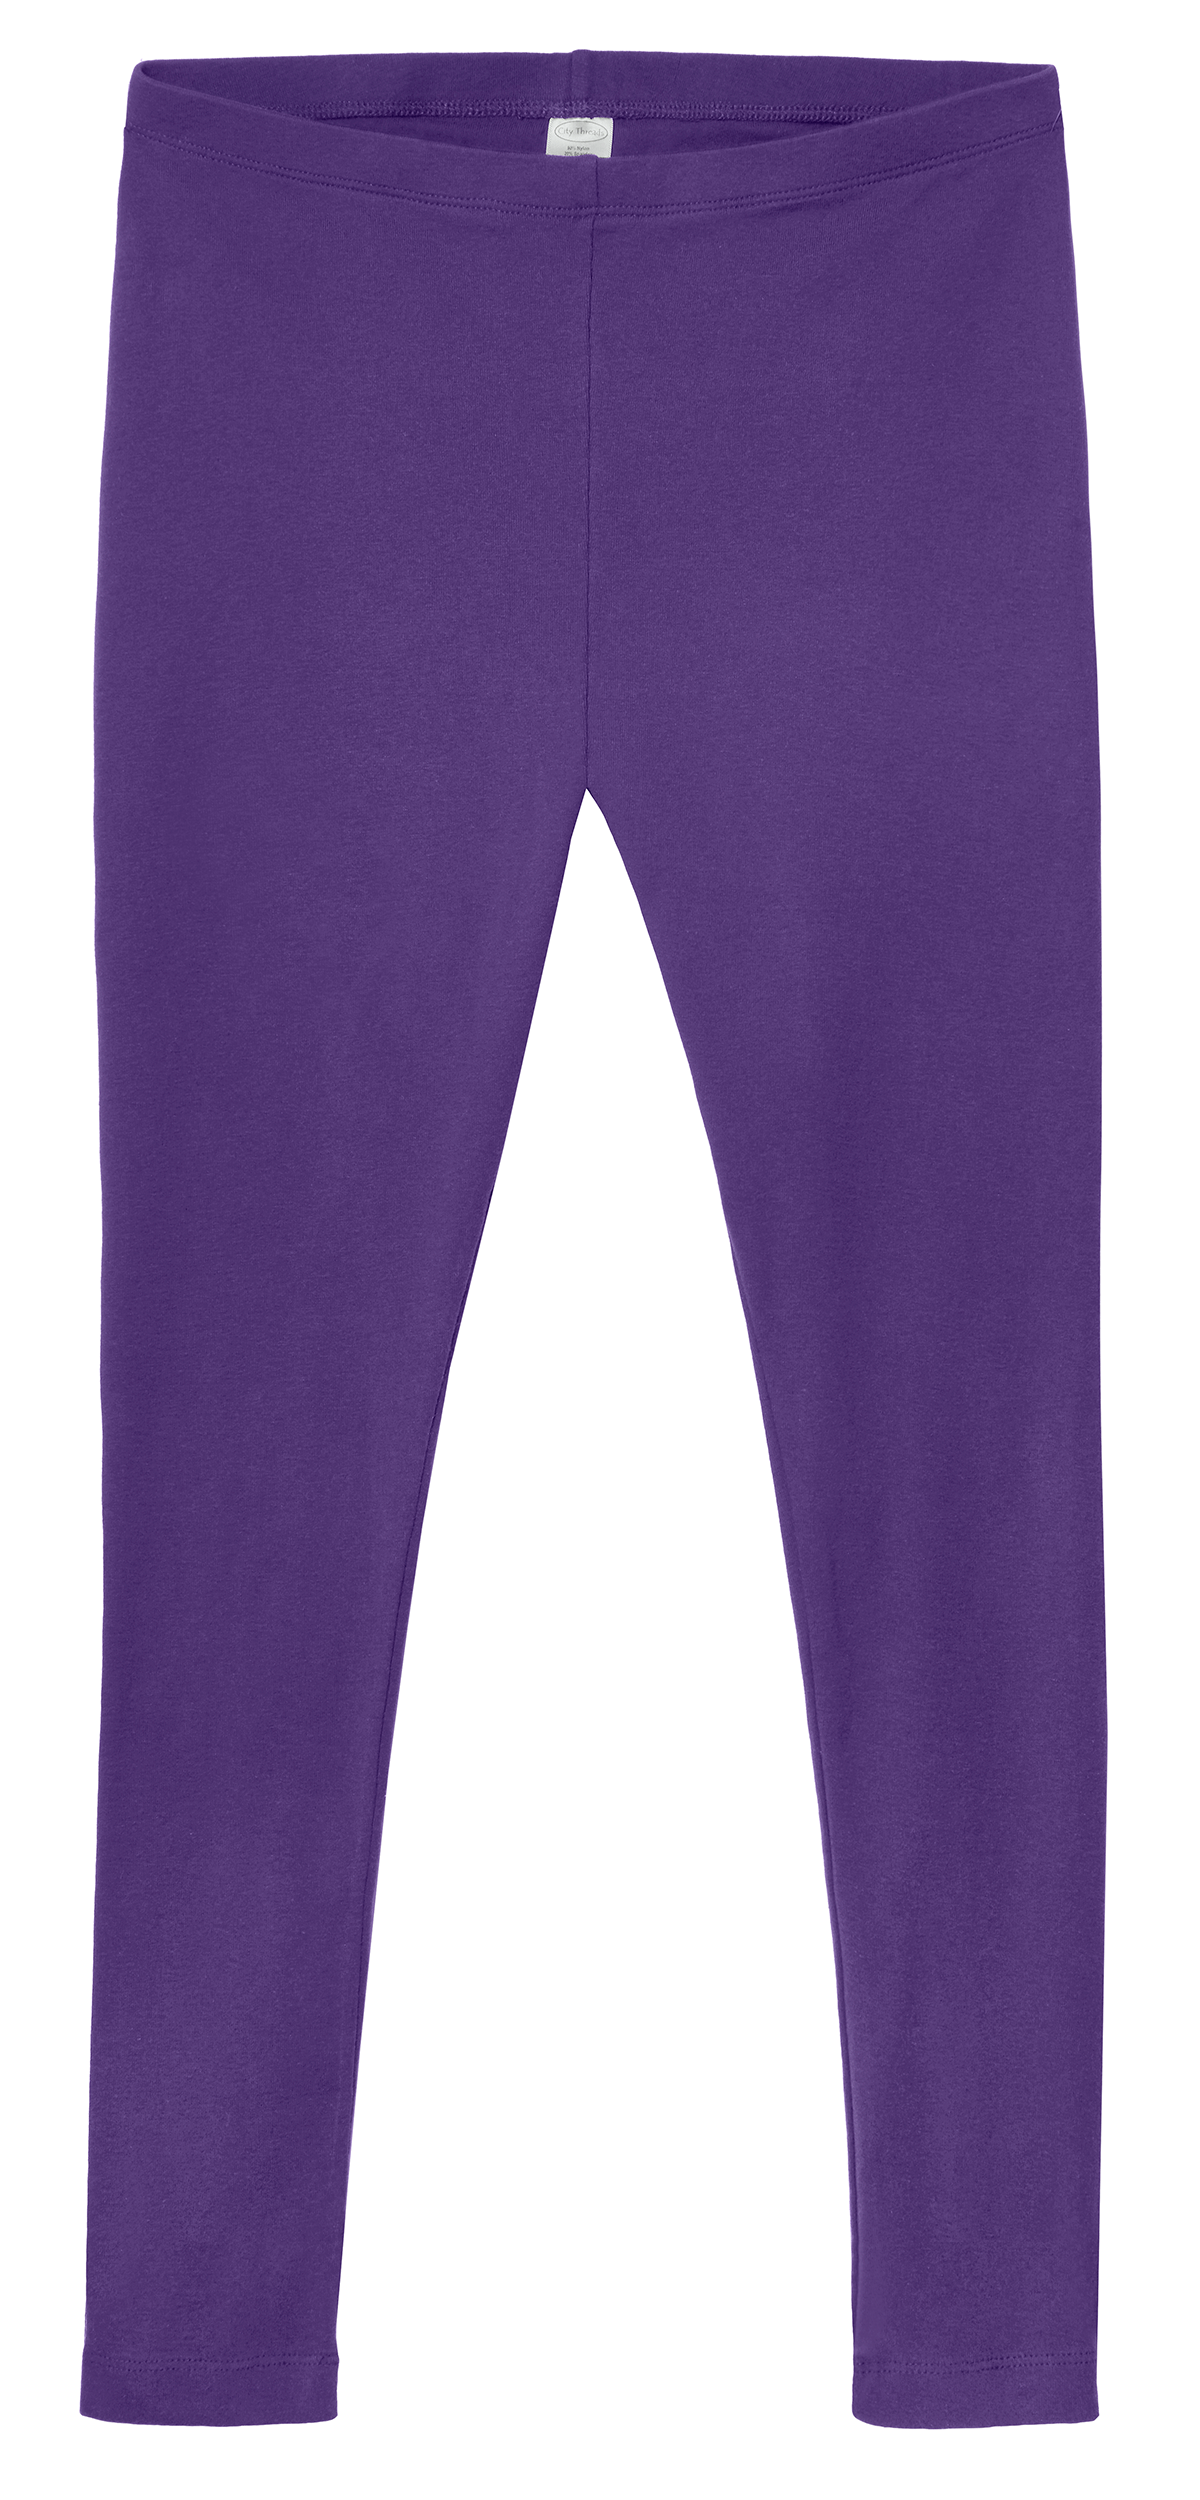 WOMEN'S SKINNY LAGGINGS 100%COTTON STRETCHABLE